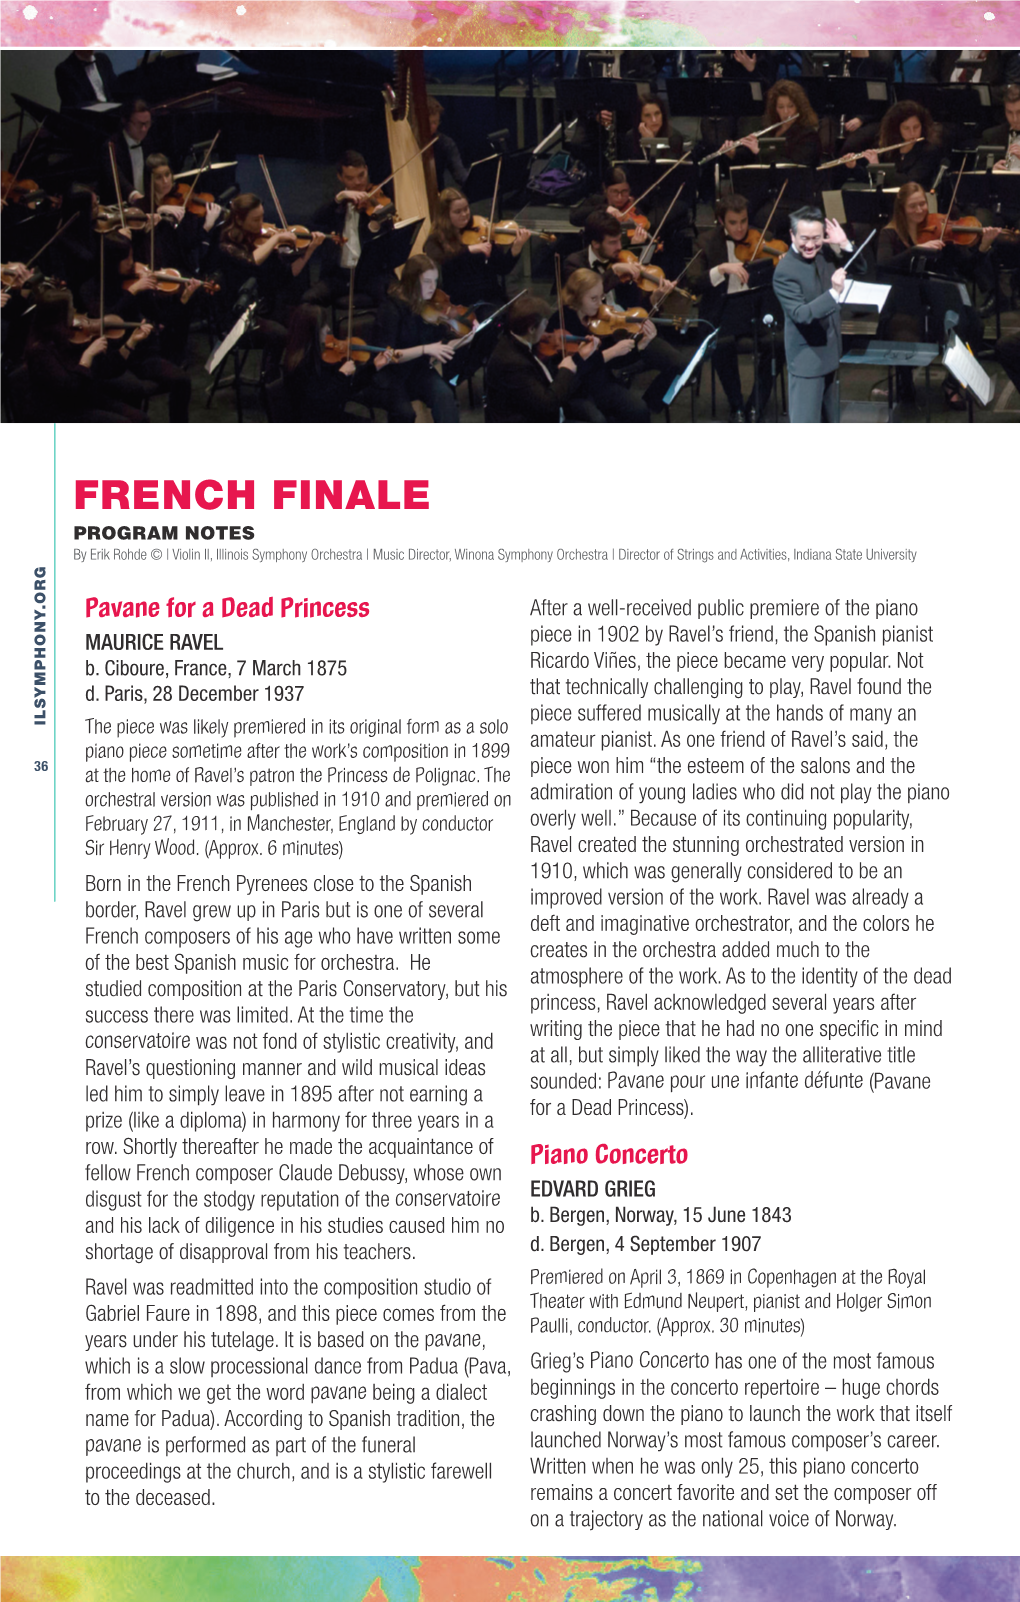 French Finale